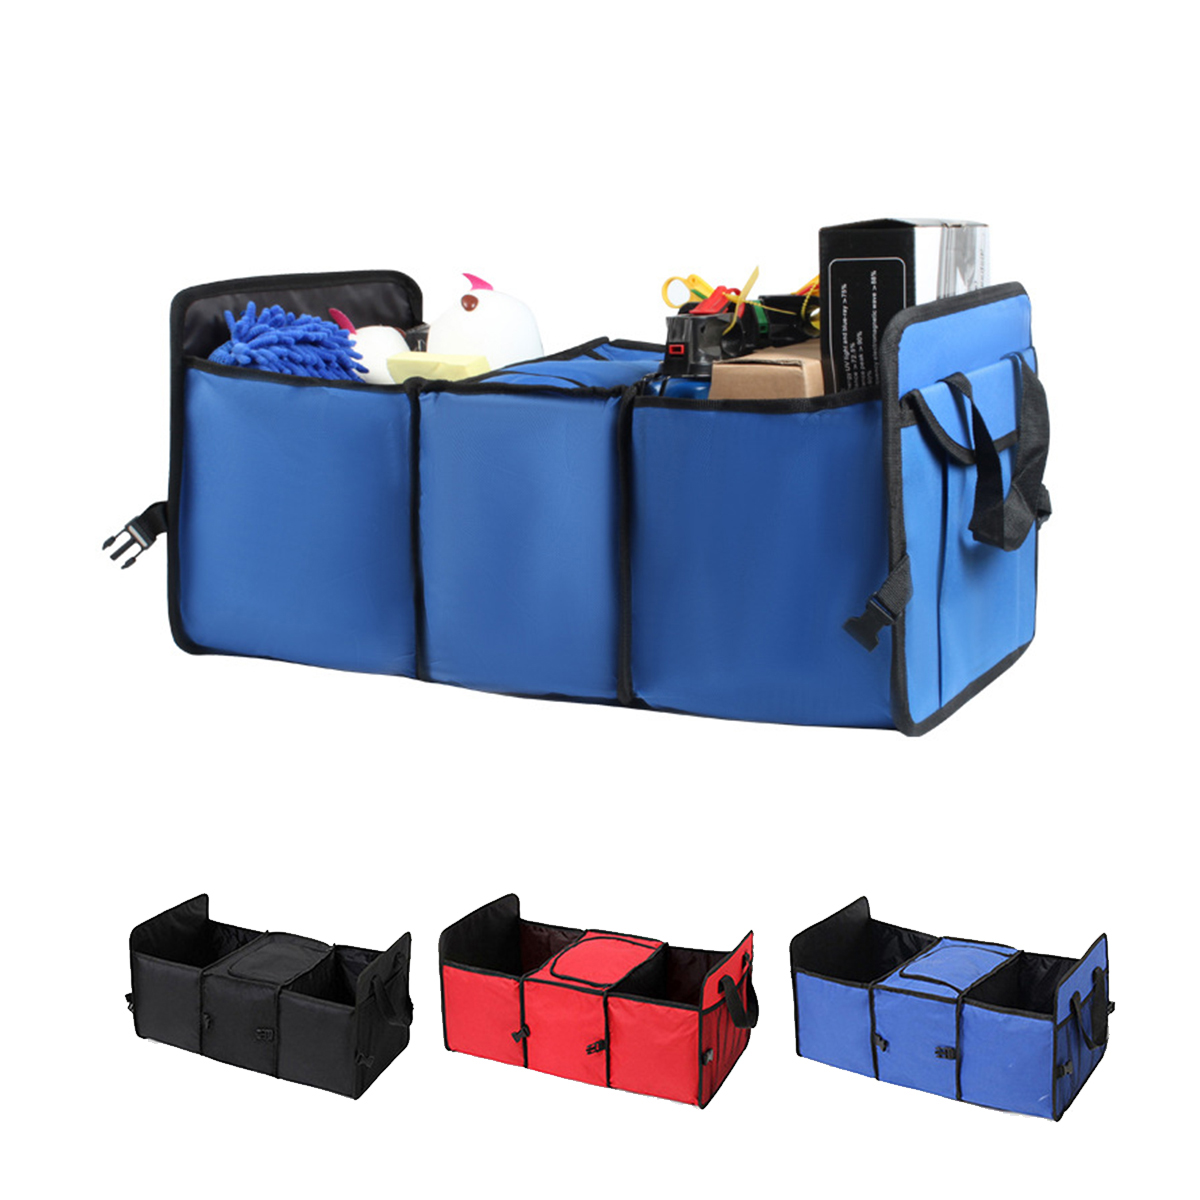 

52L Foldable Car Trunk Boot Organizer Collapsible Box Storage Pocket Case Holder